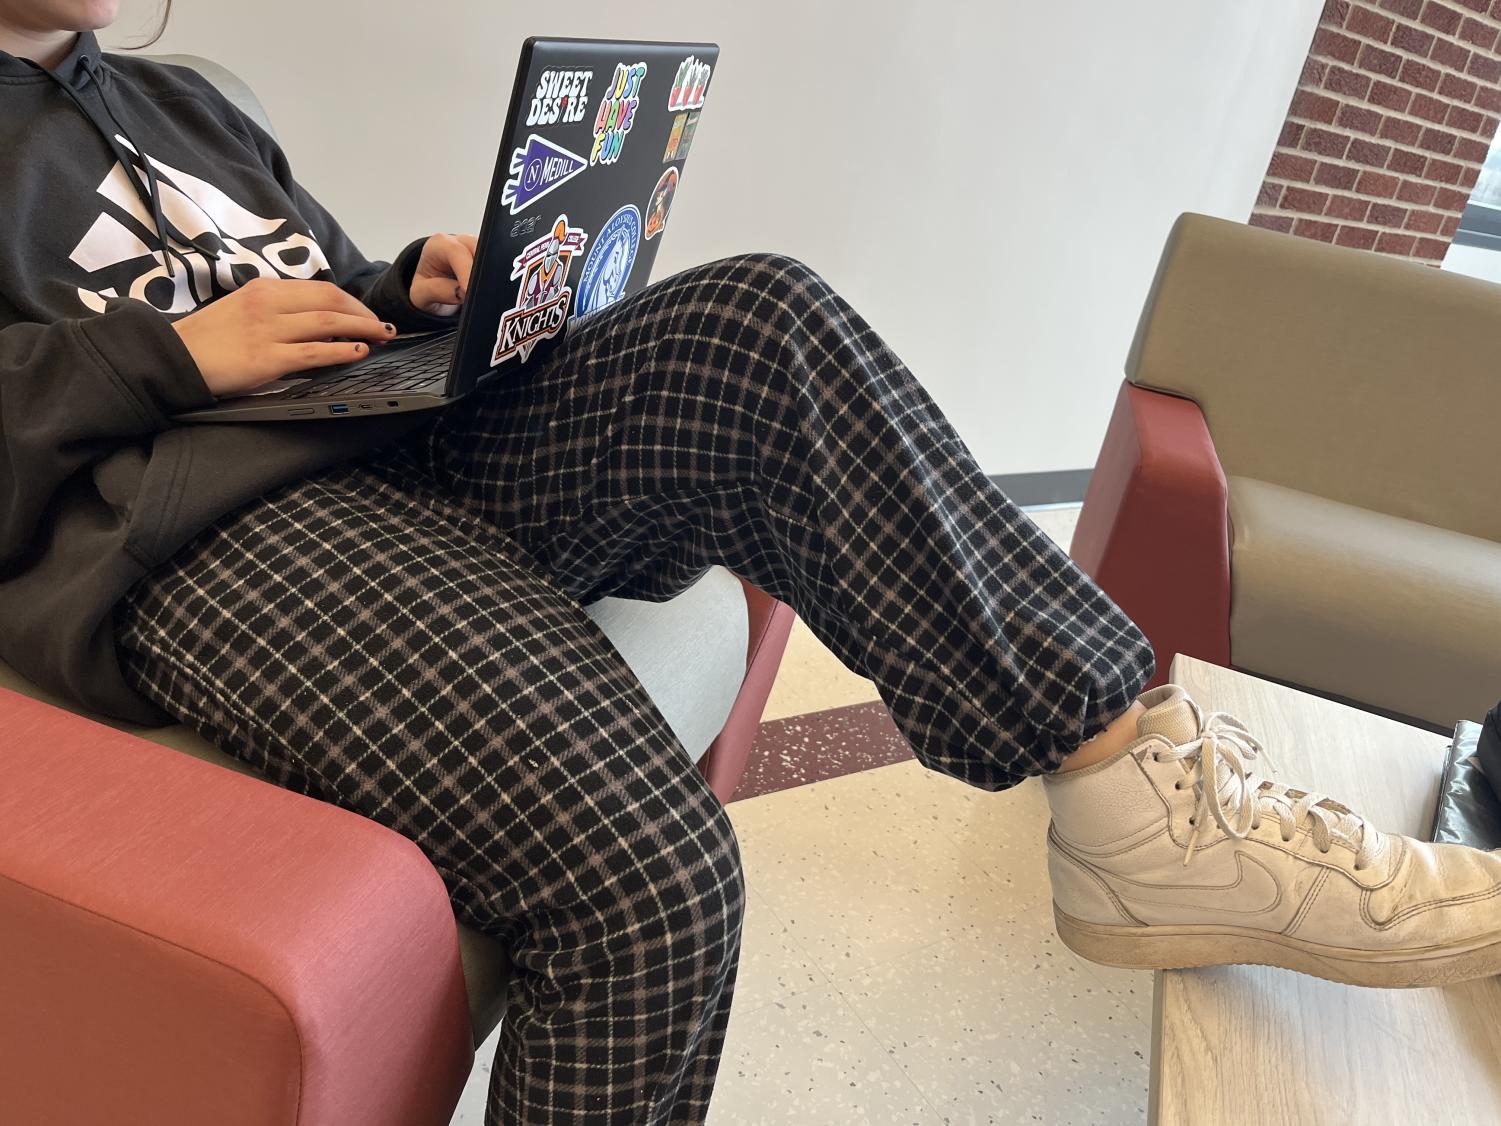 Pajama pants are acceptable for student attire at school – Mountain Echo